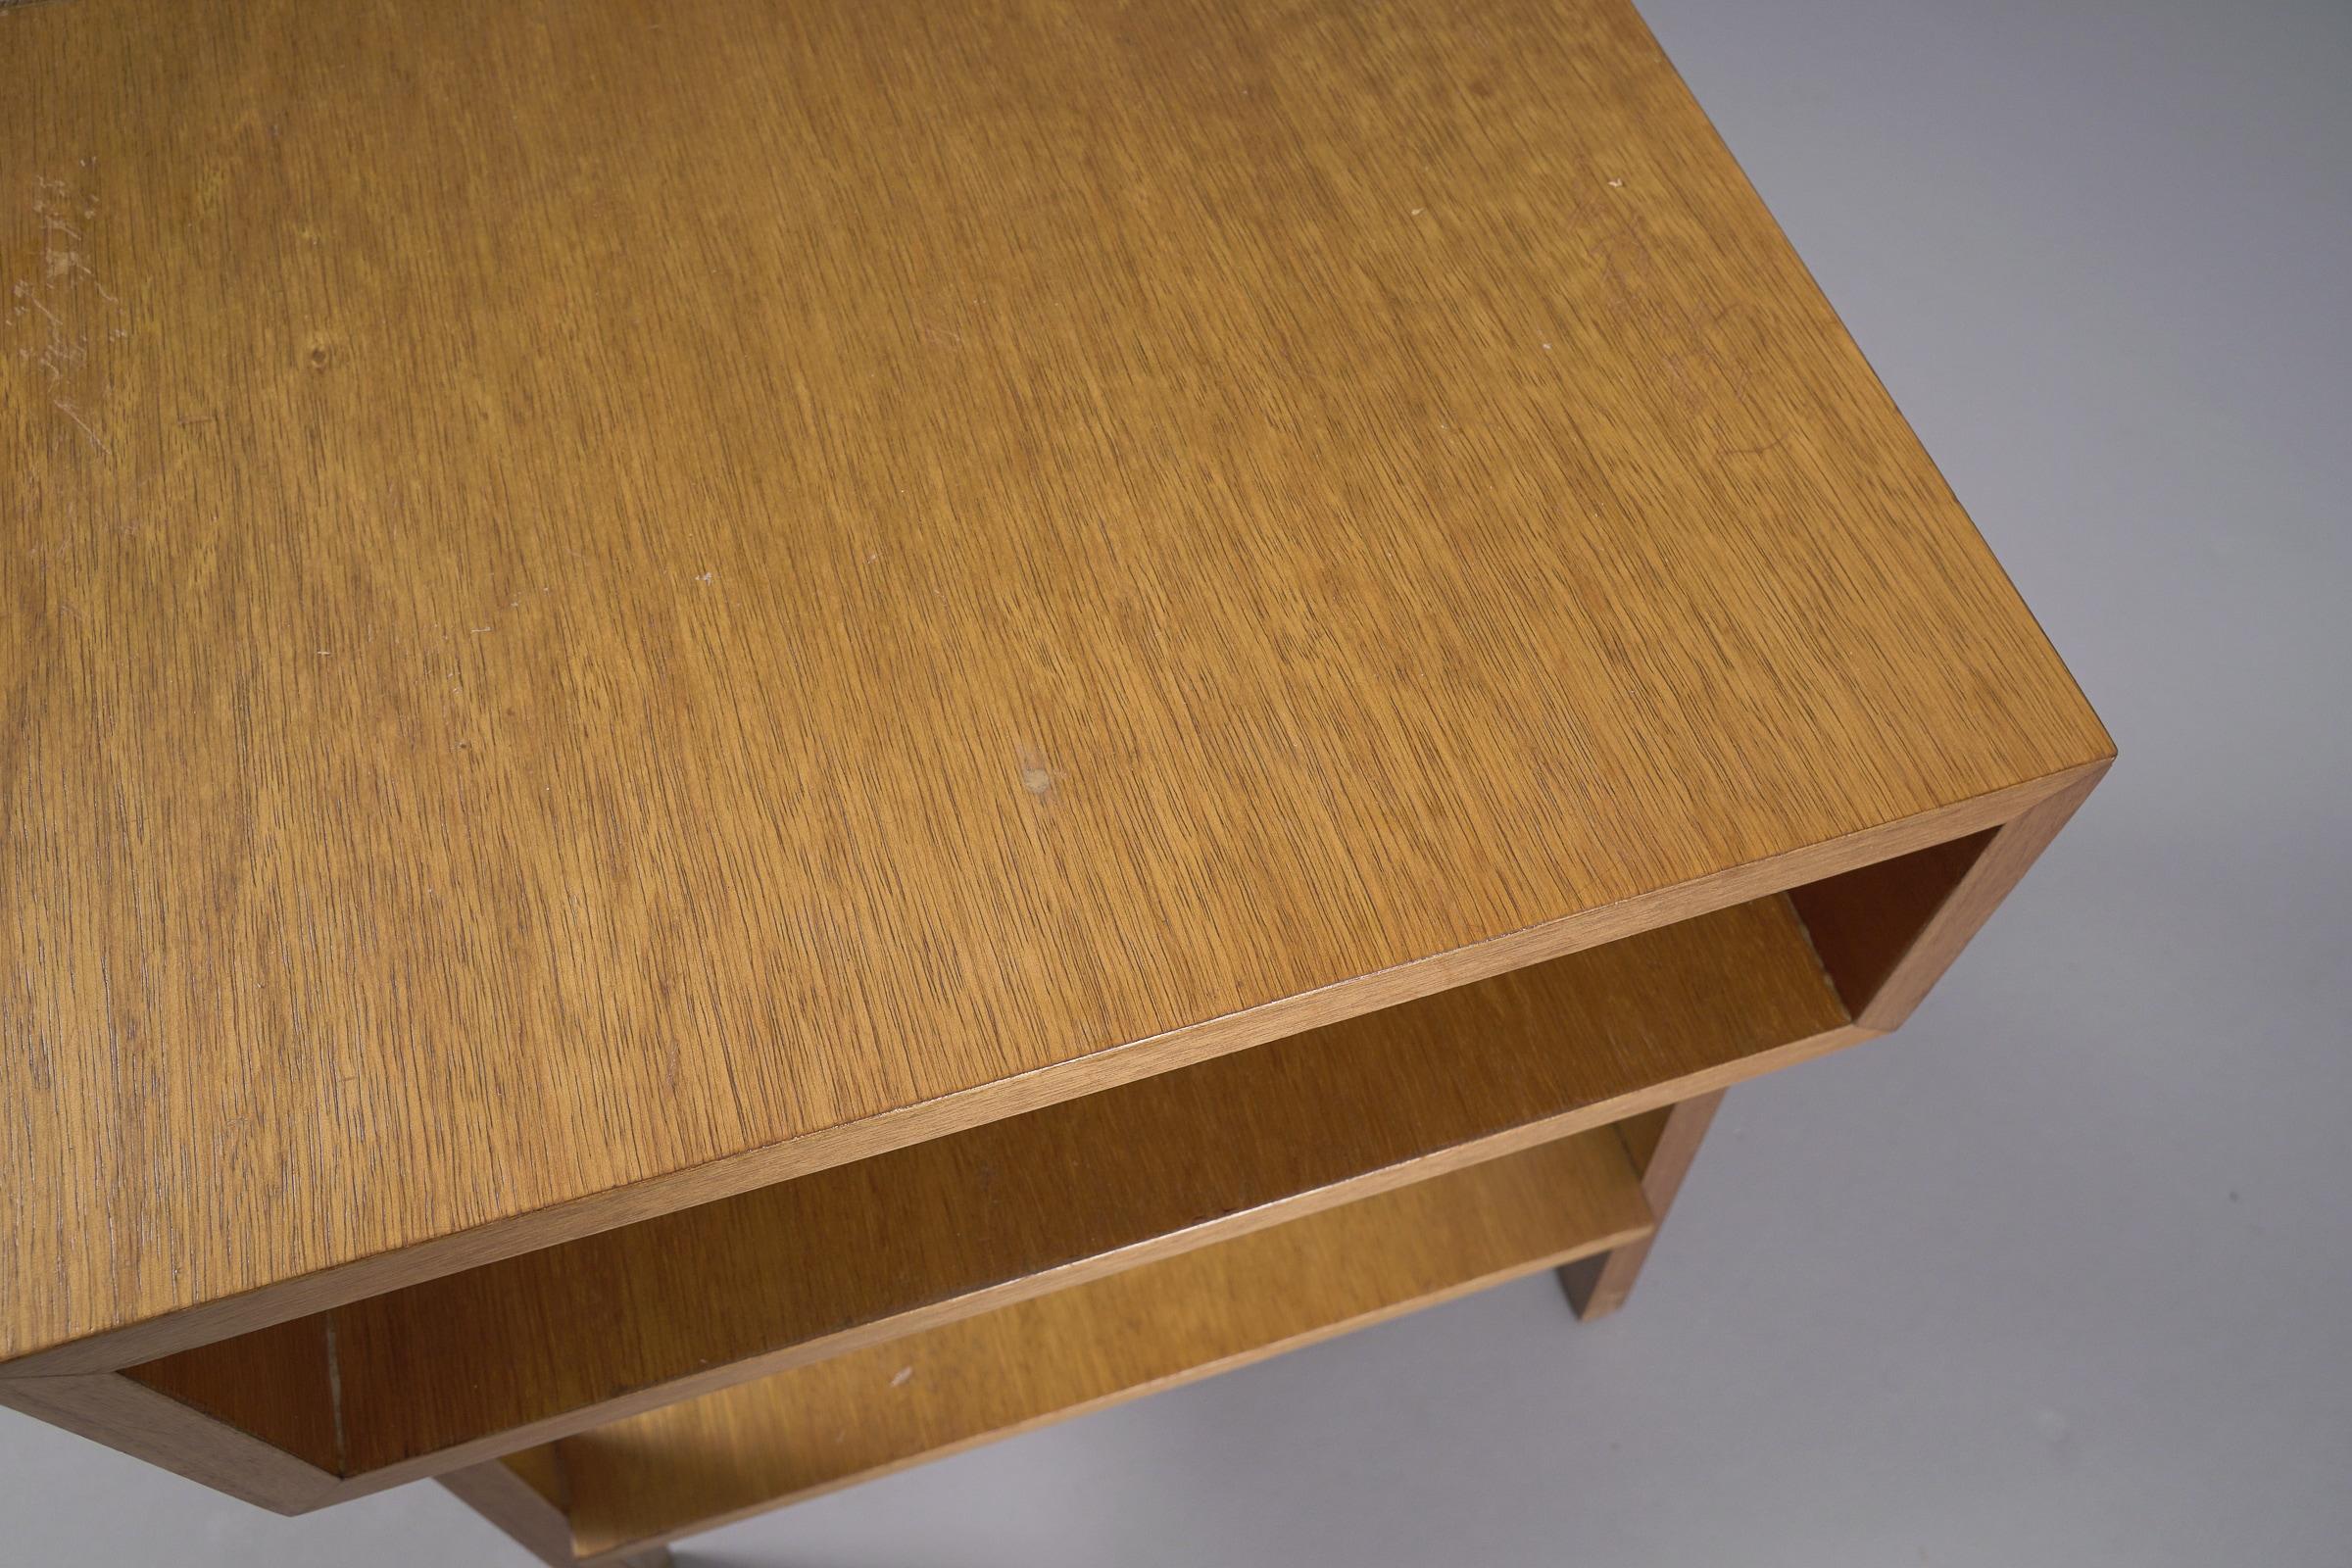  Pair of Minimalistic Mid-Century Modern Wooden Nightstands, Italy 1950s For Sale 8